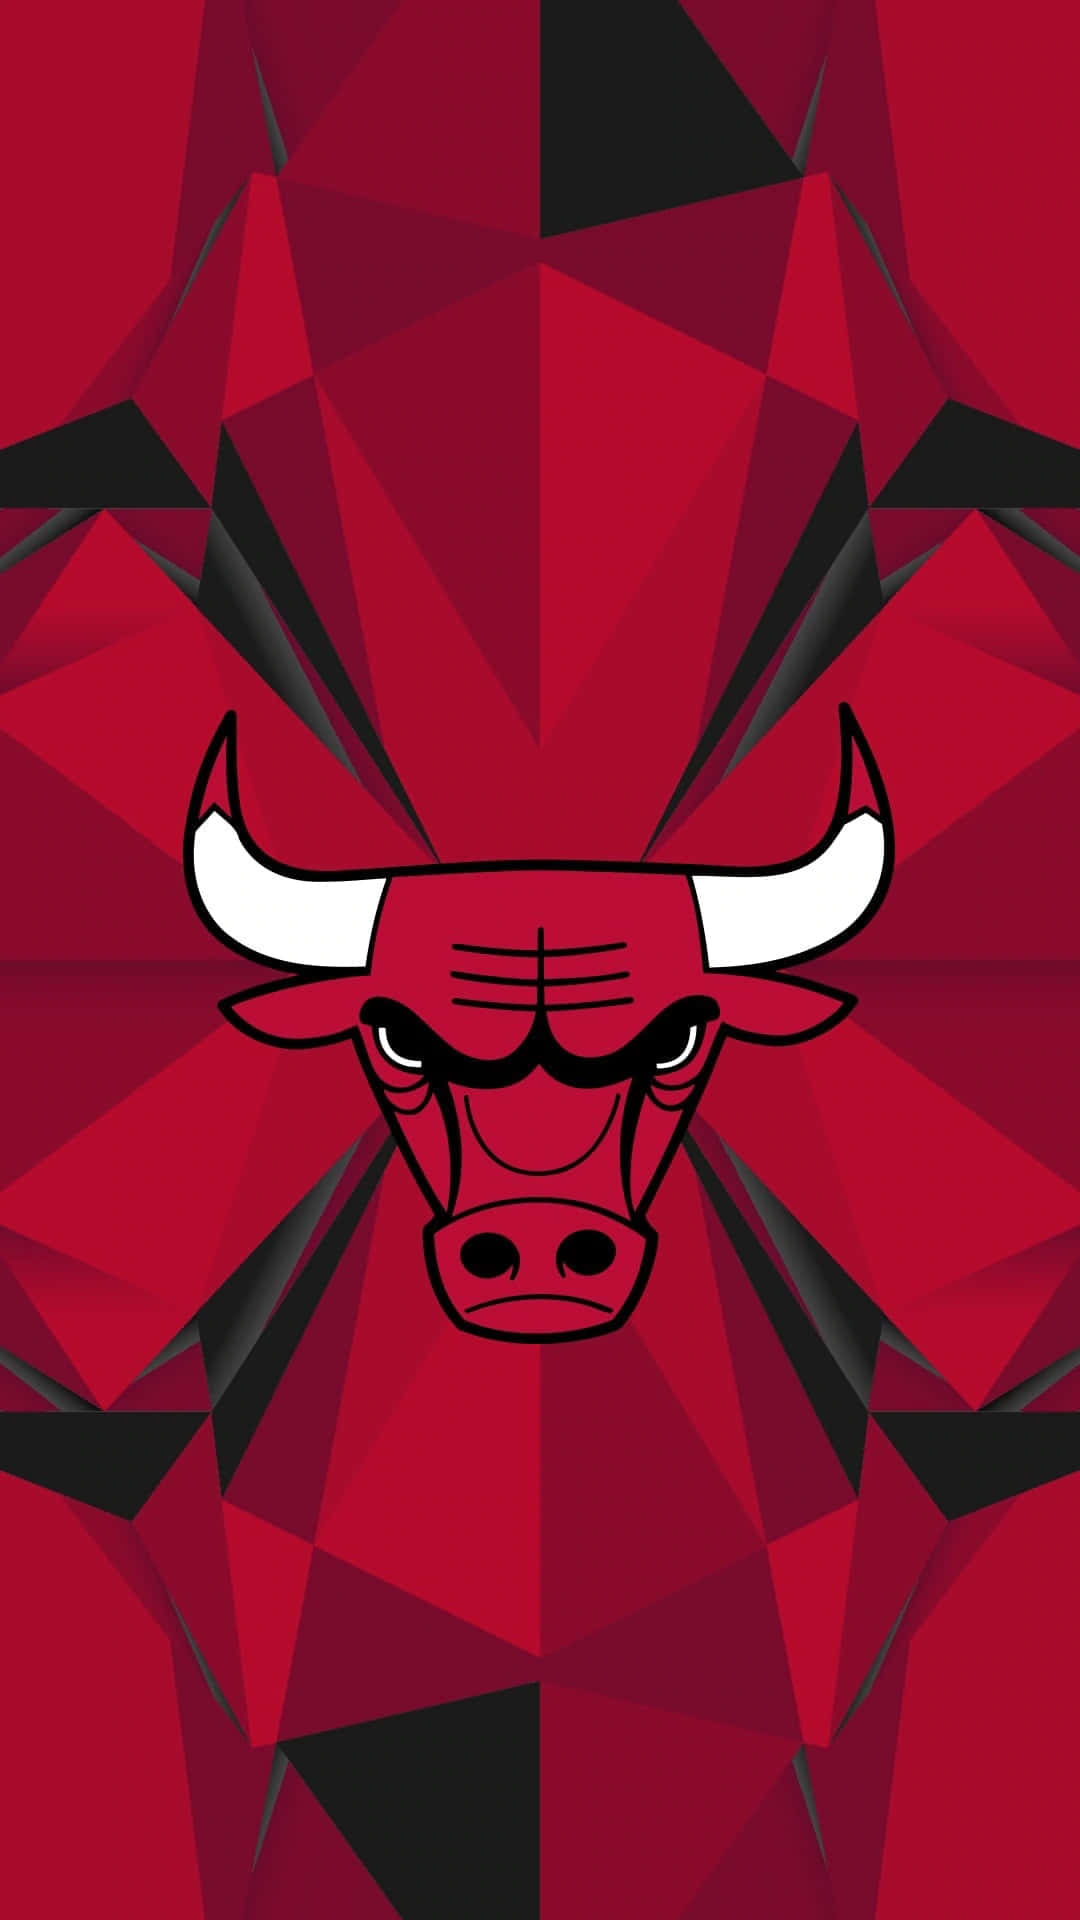 Show Your Chicago Bulls Spirit With This Iphone Wallpaper Background